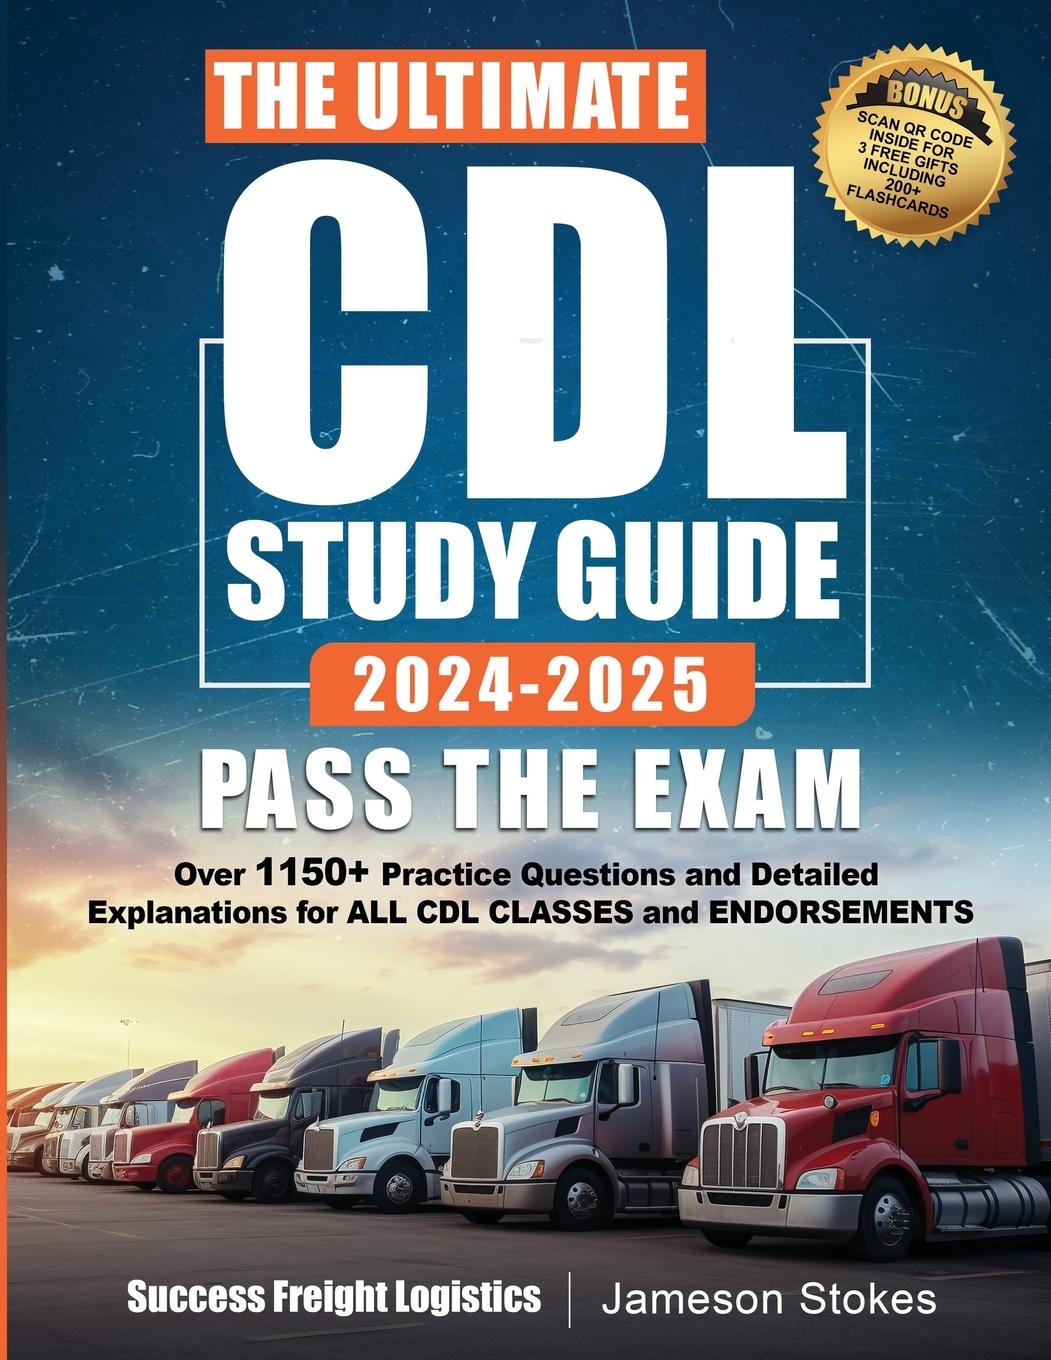 Book The Ultimate CDL Study Guide 2024-2025 PASS THE EXAM Success Freight Logistics